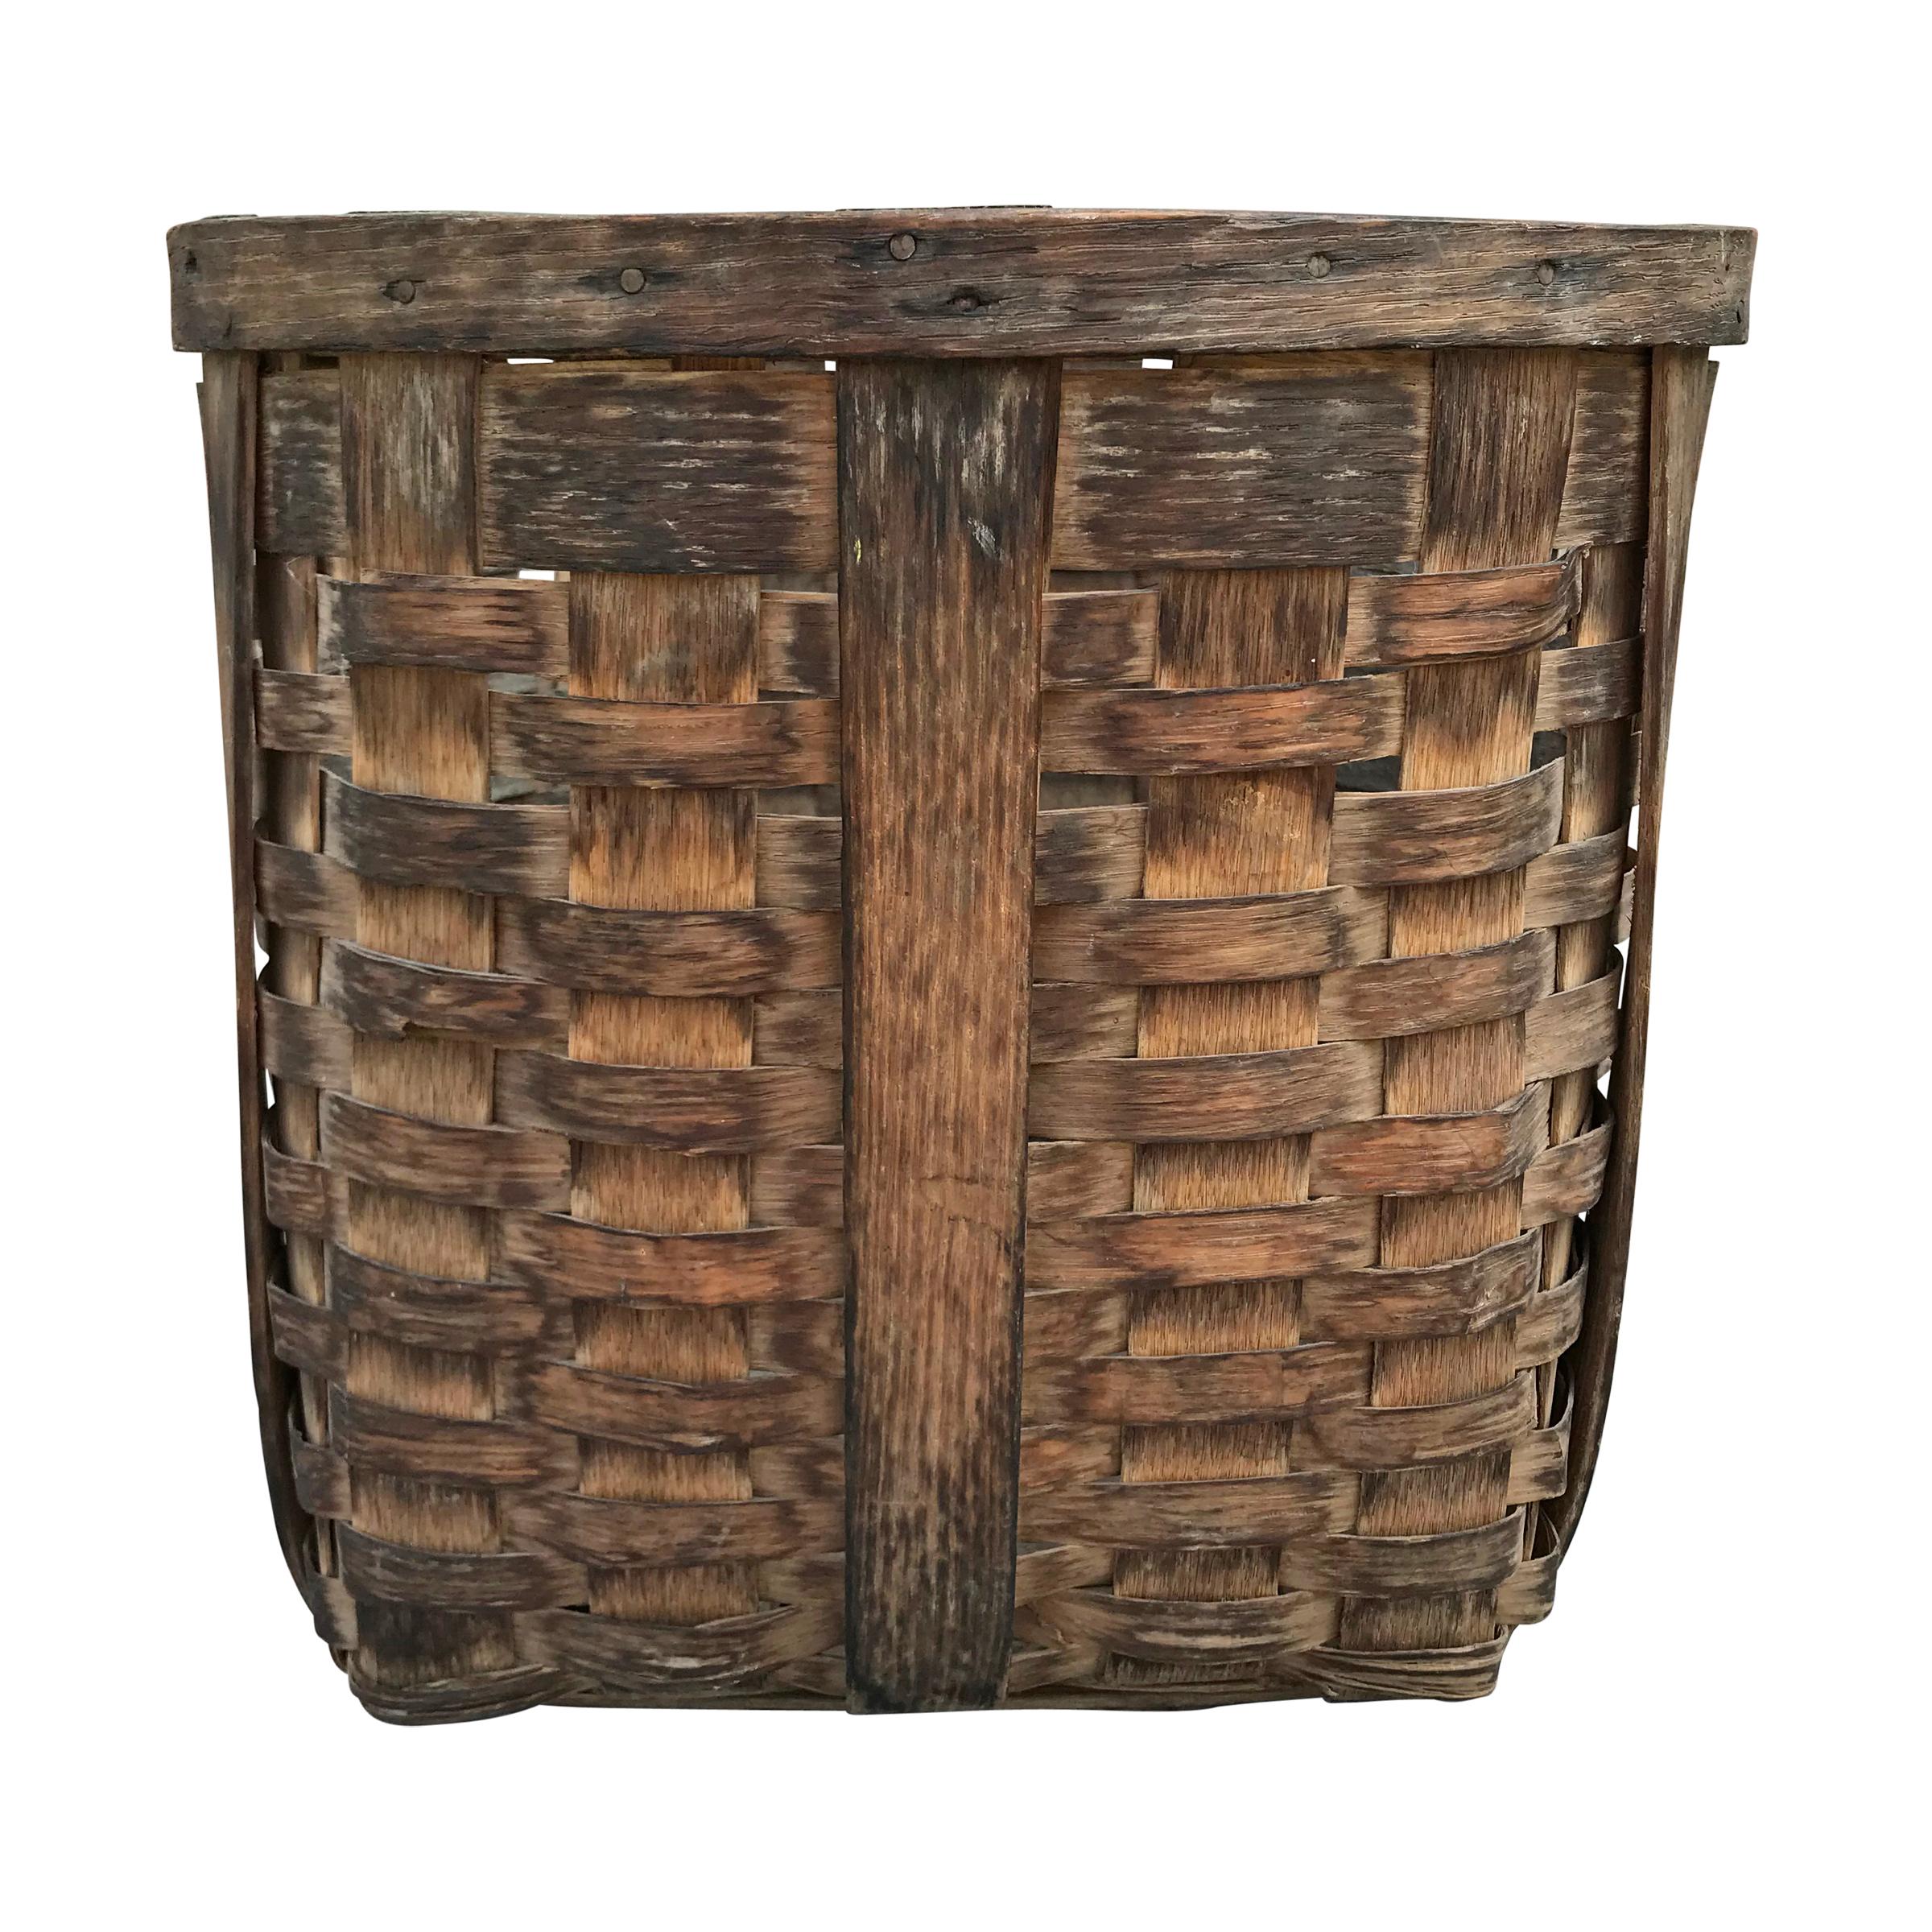 A lovely pair of 19th century American handwoven oak splint potato gathering baskets, found in Northern Michigan, with wonderful patina, each with two handles and wide straps sturdy enough to support the weight of a basket full of potatoes. The